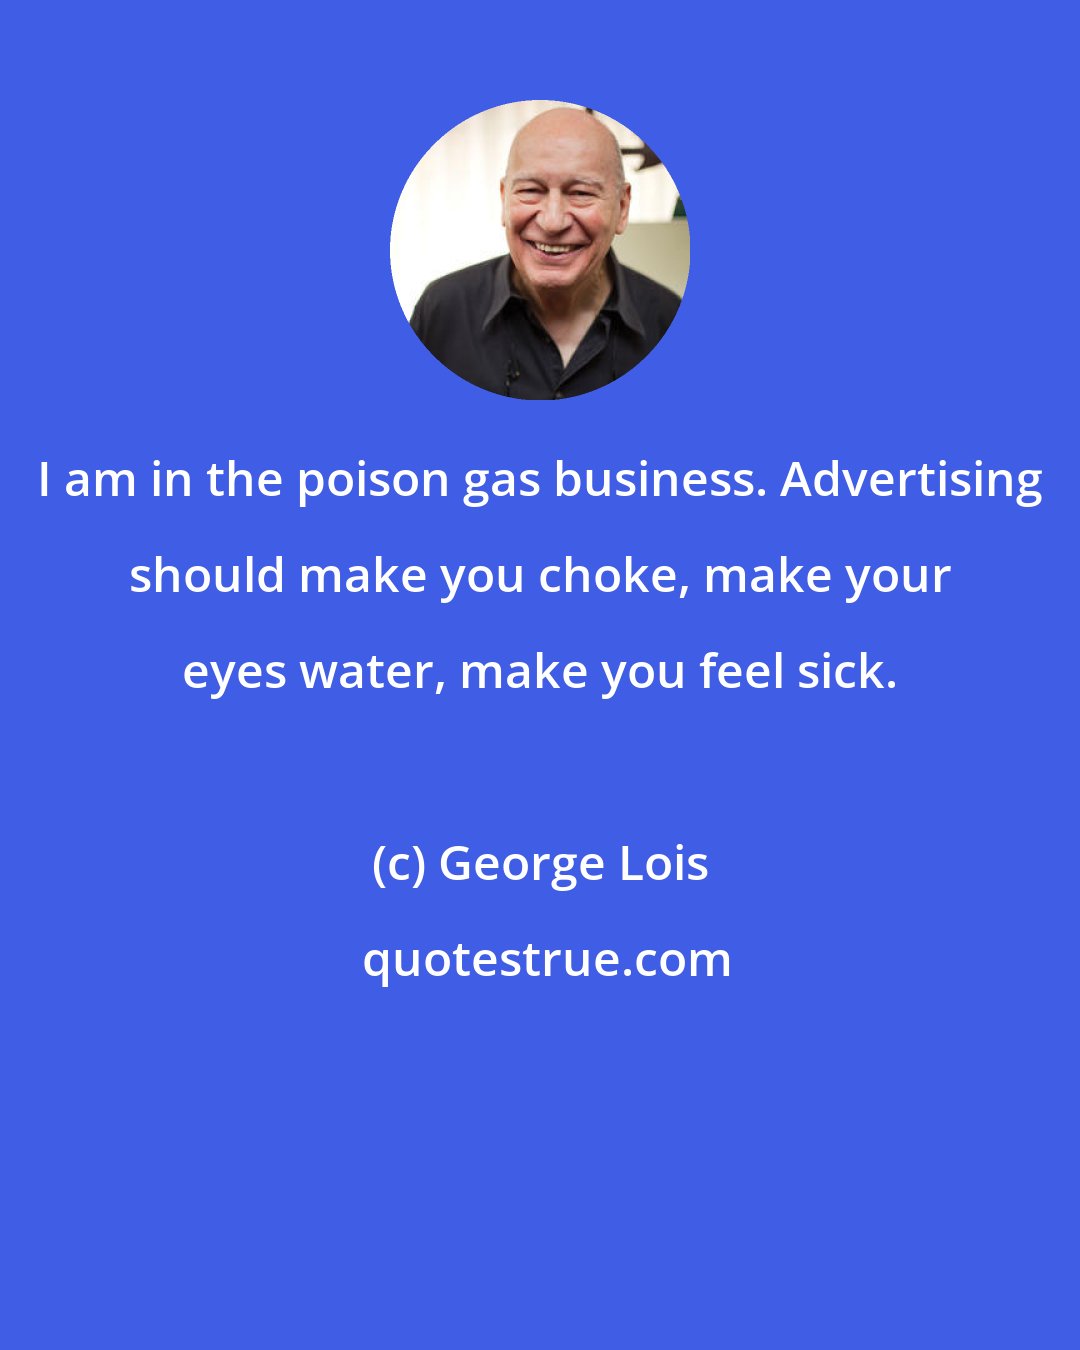 George Lois: I am in the poison gas business. Advertising should make you choke, make your eyes water, make you feel sick.